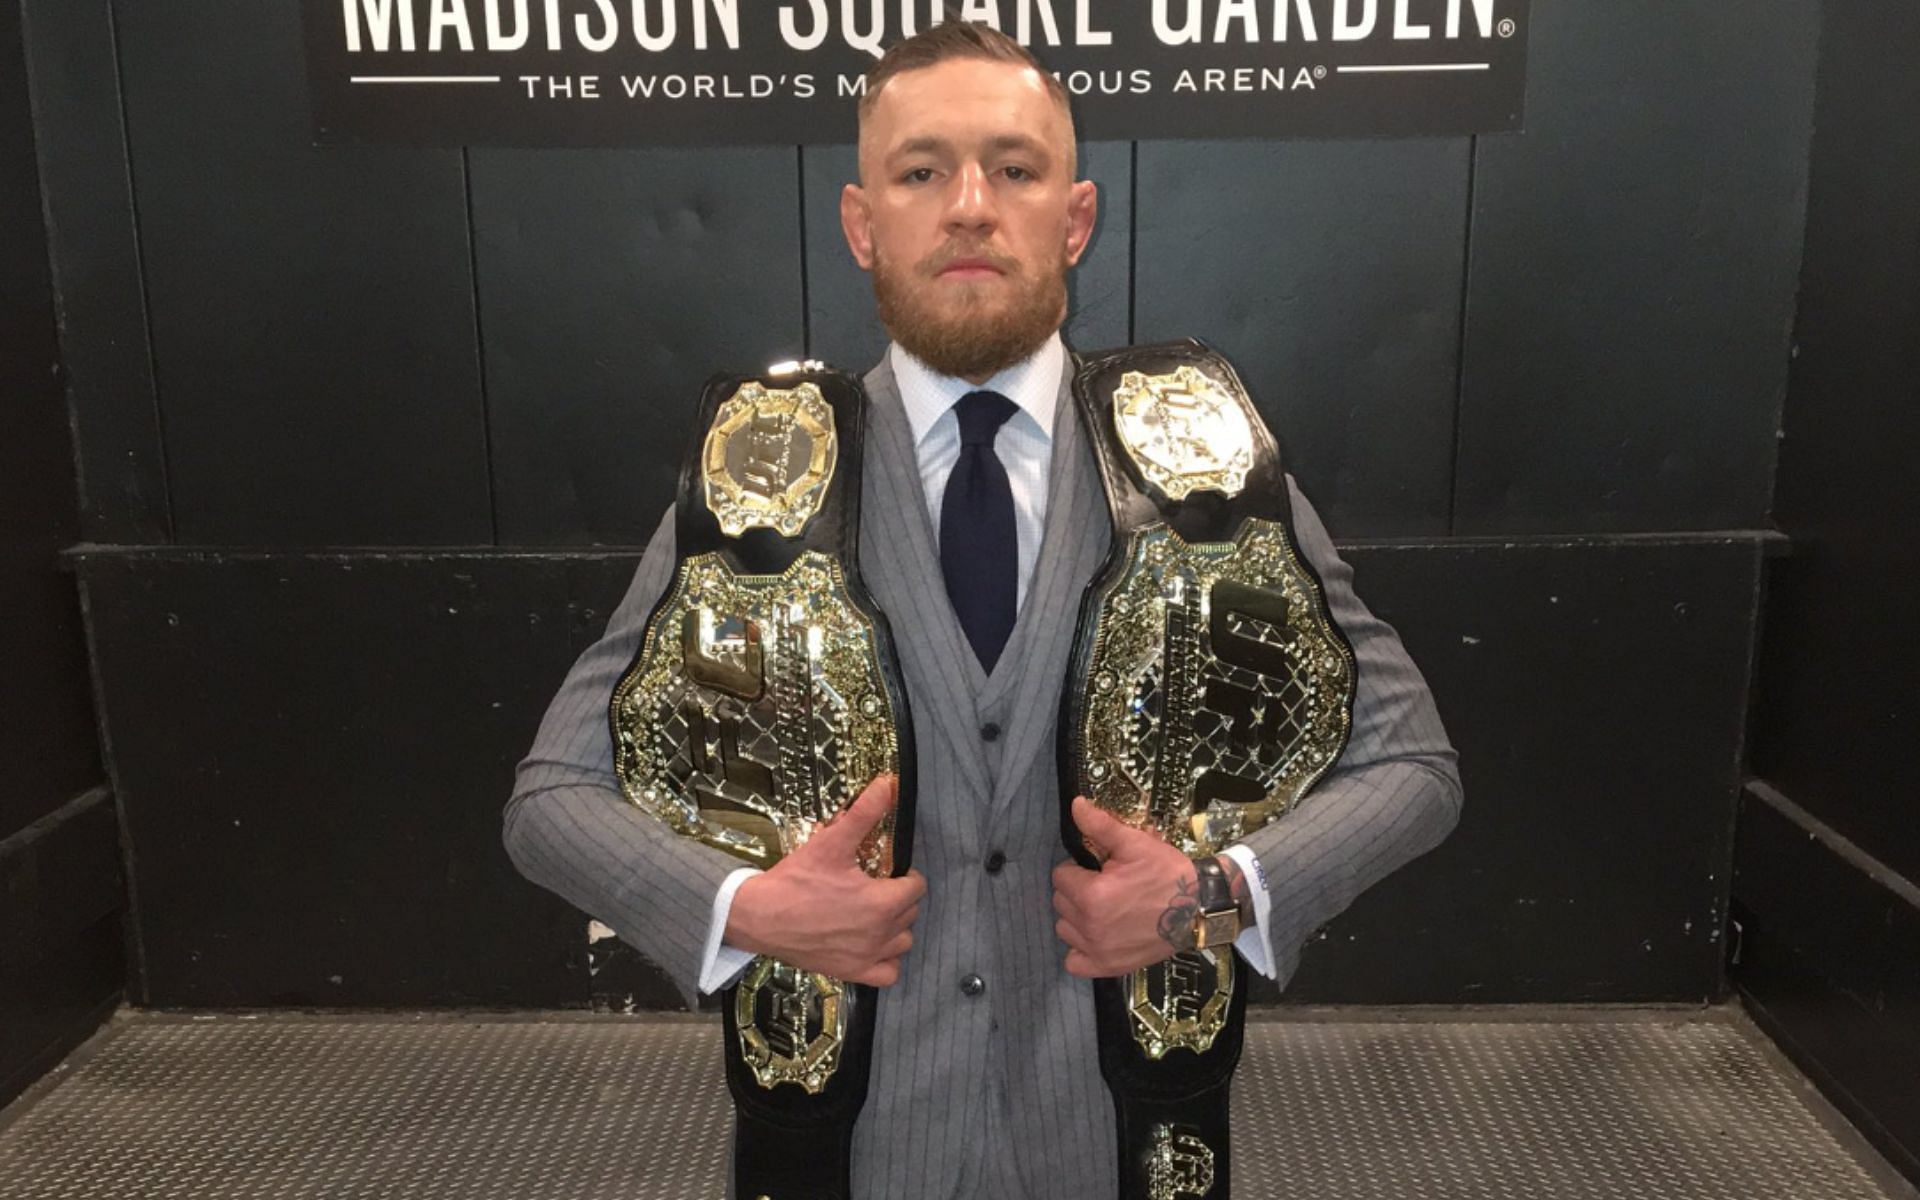 Conor McGregor reflects on becoming a two-division champion (pictured). [Image courtesy: @thenotoriousmma on X]